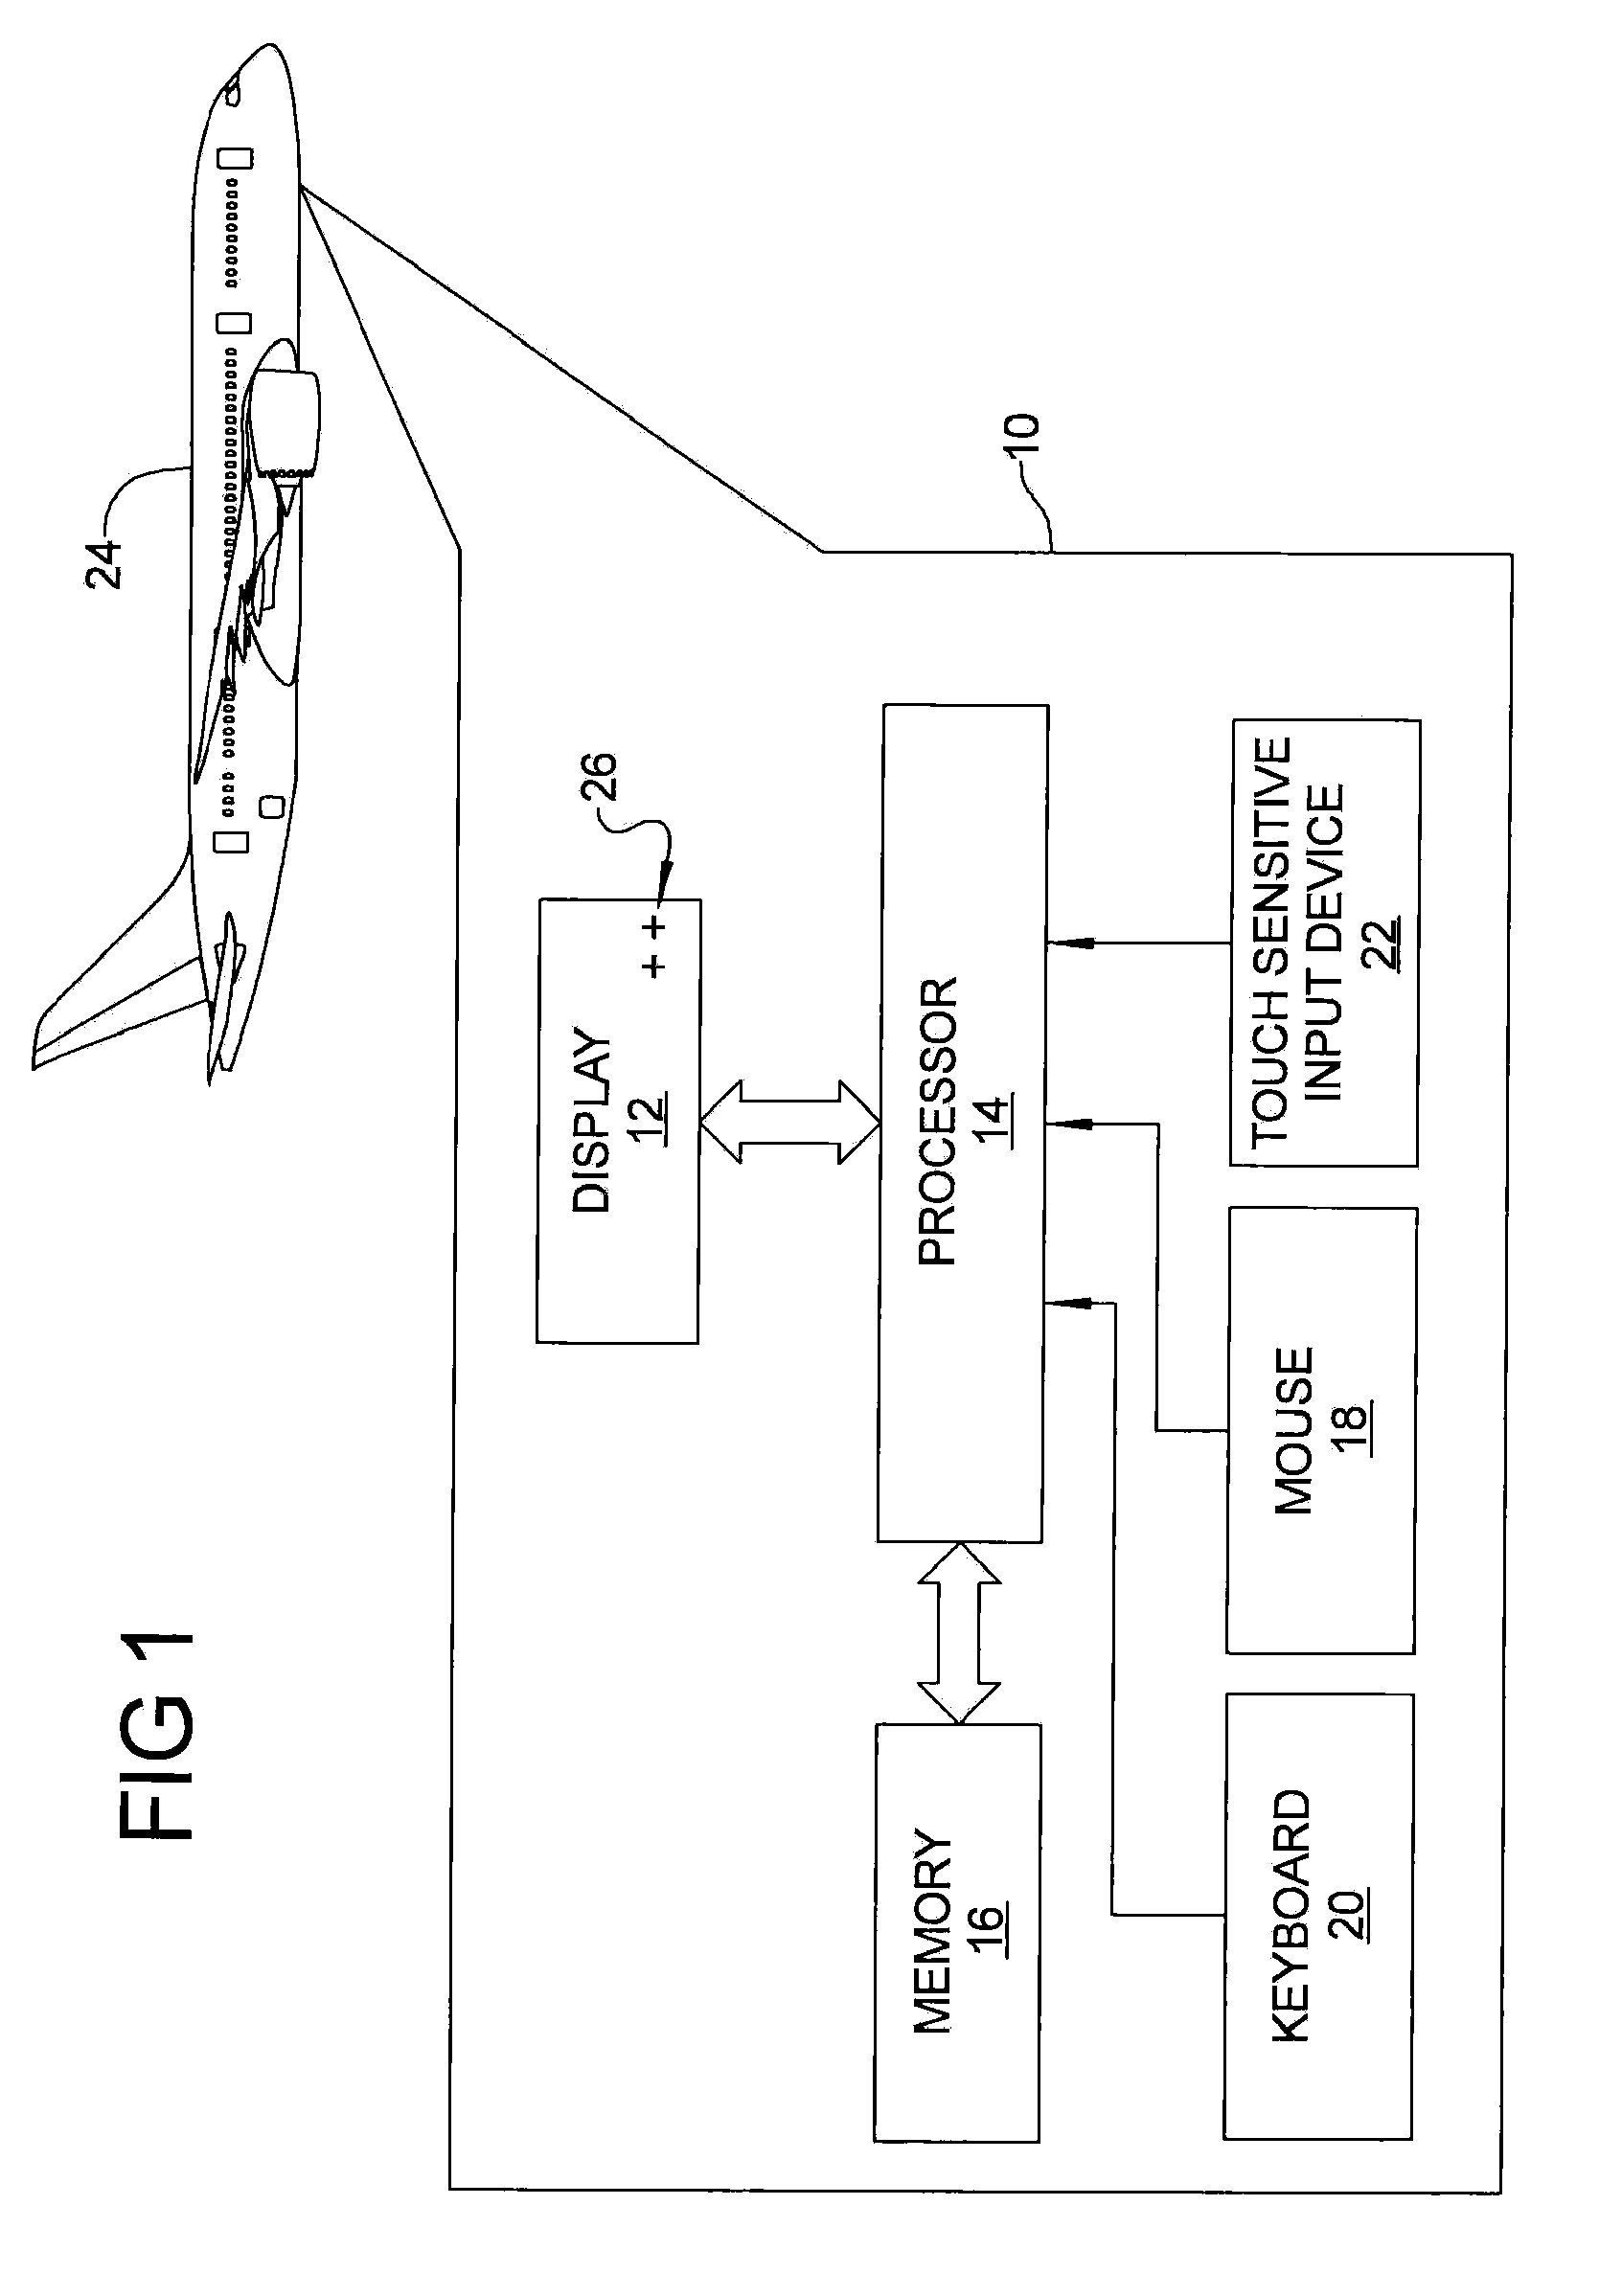 Graphical display system and method